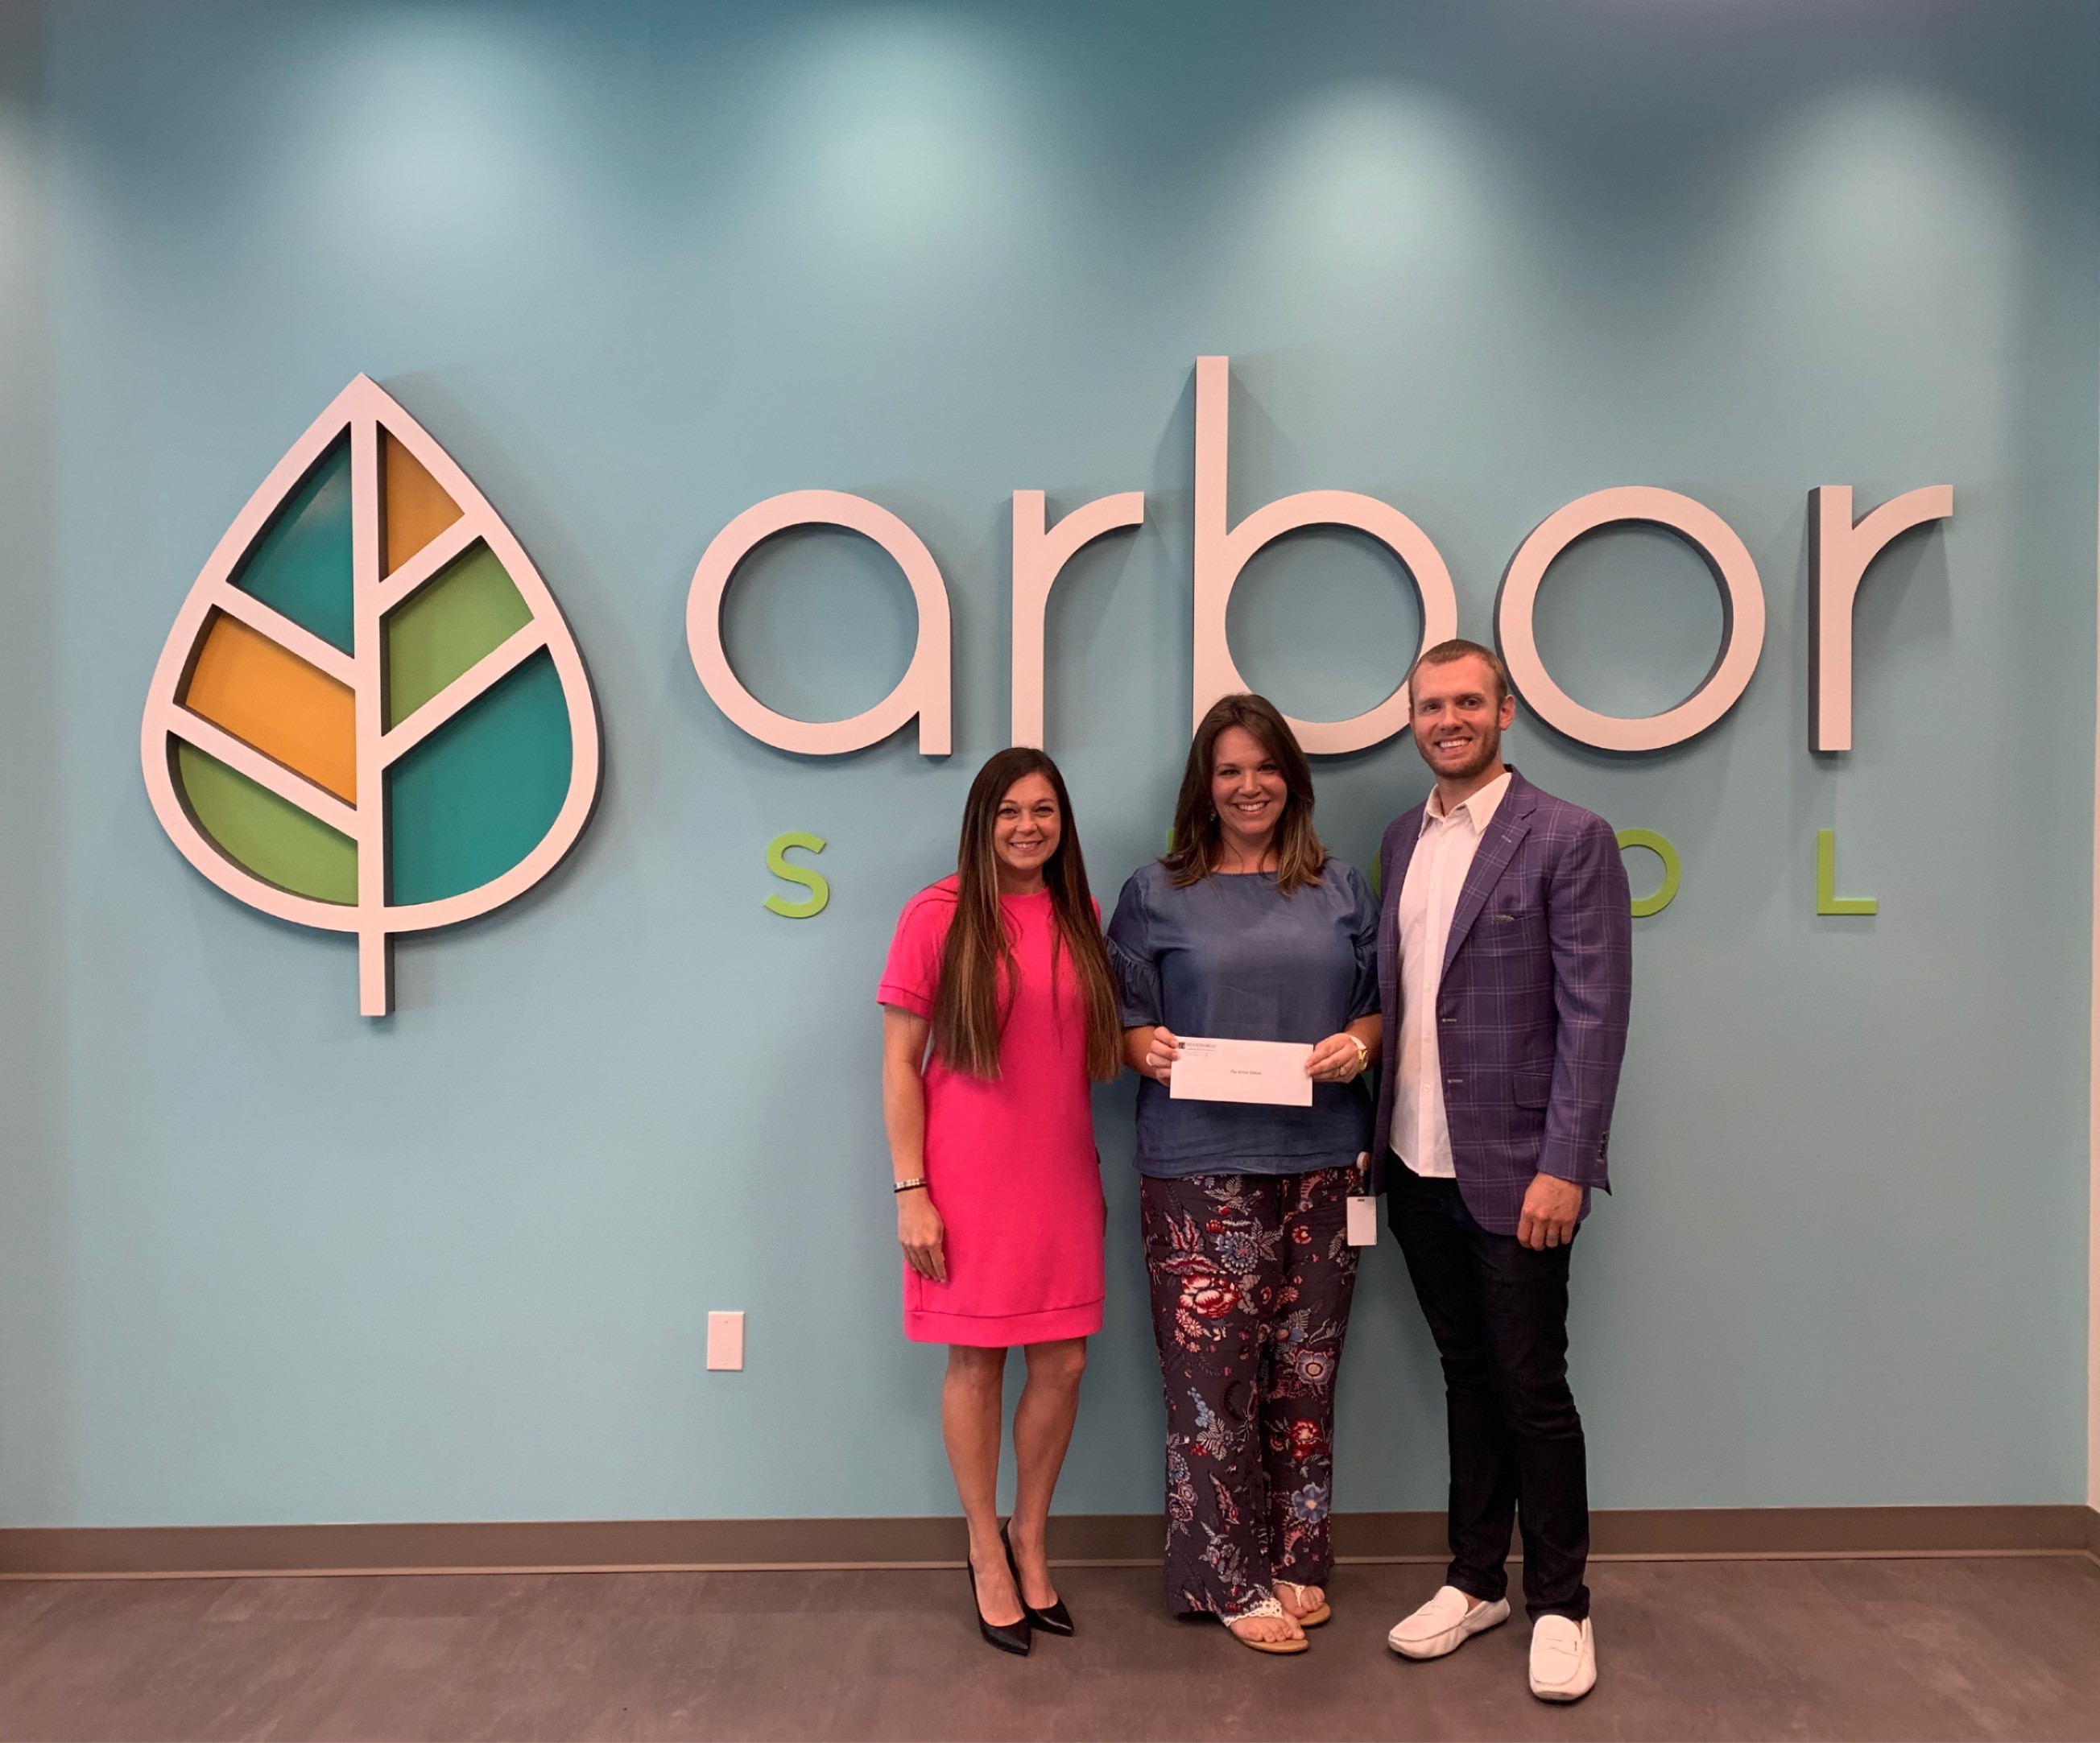 The Arbor School receives a donation from The Woodforest Charitable Foundation.